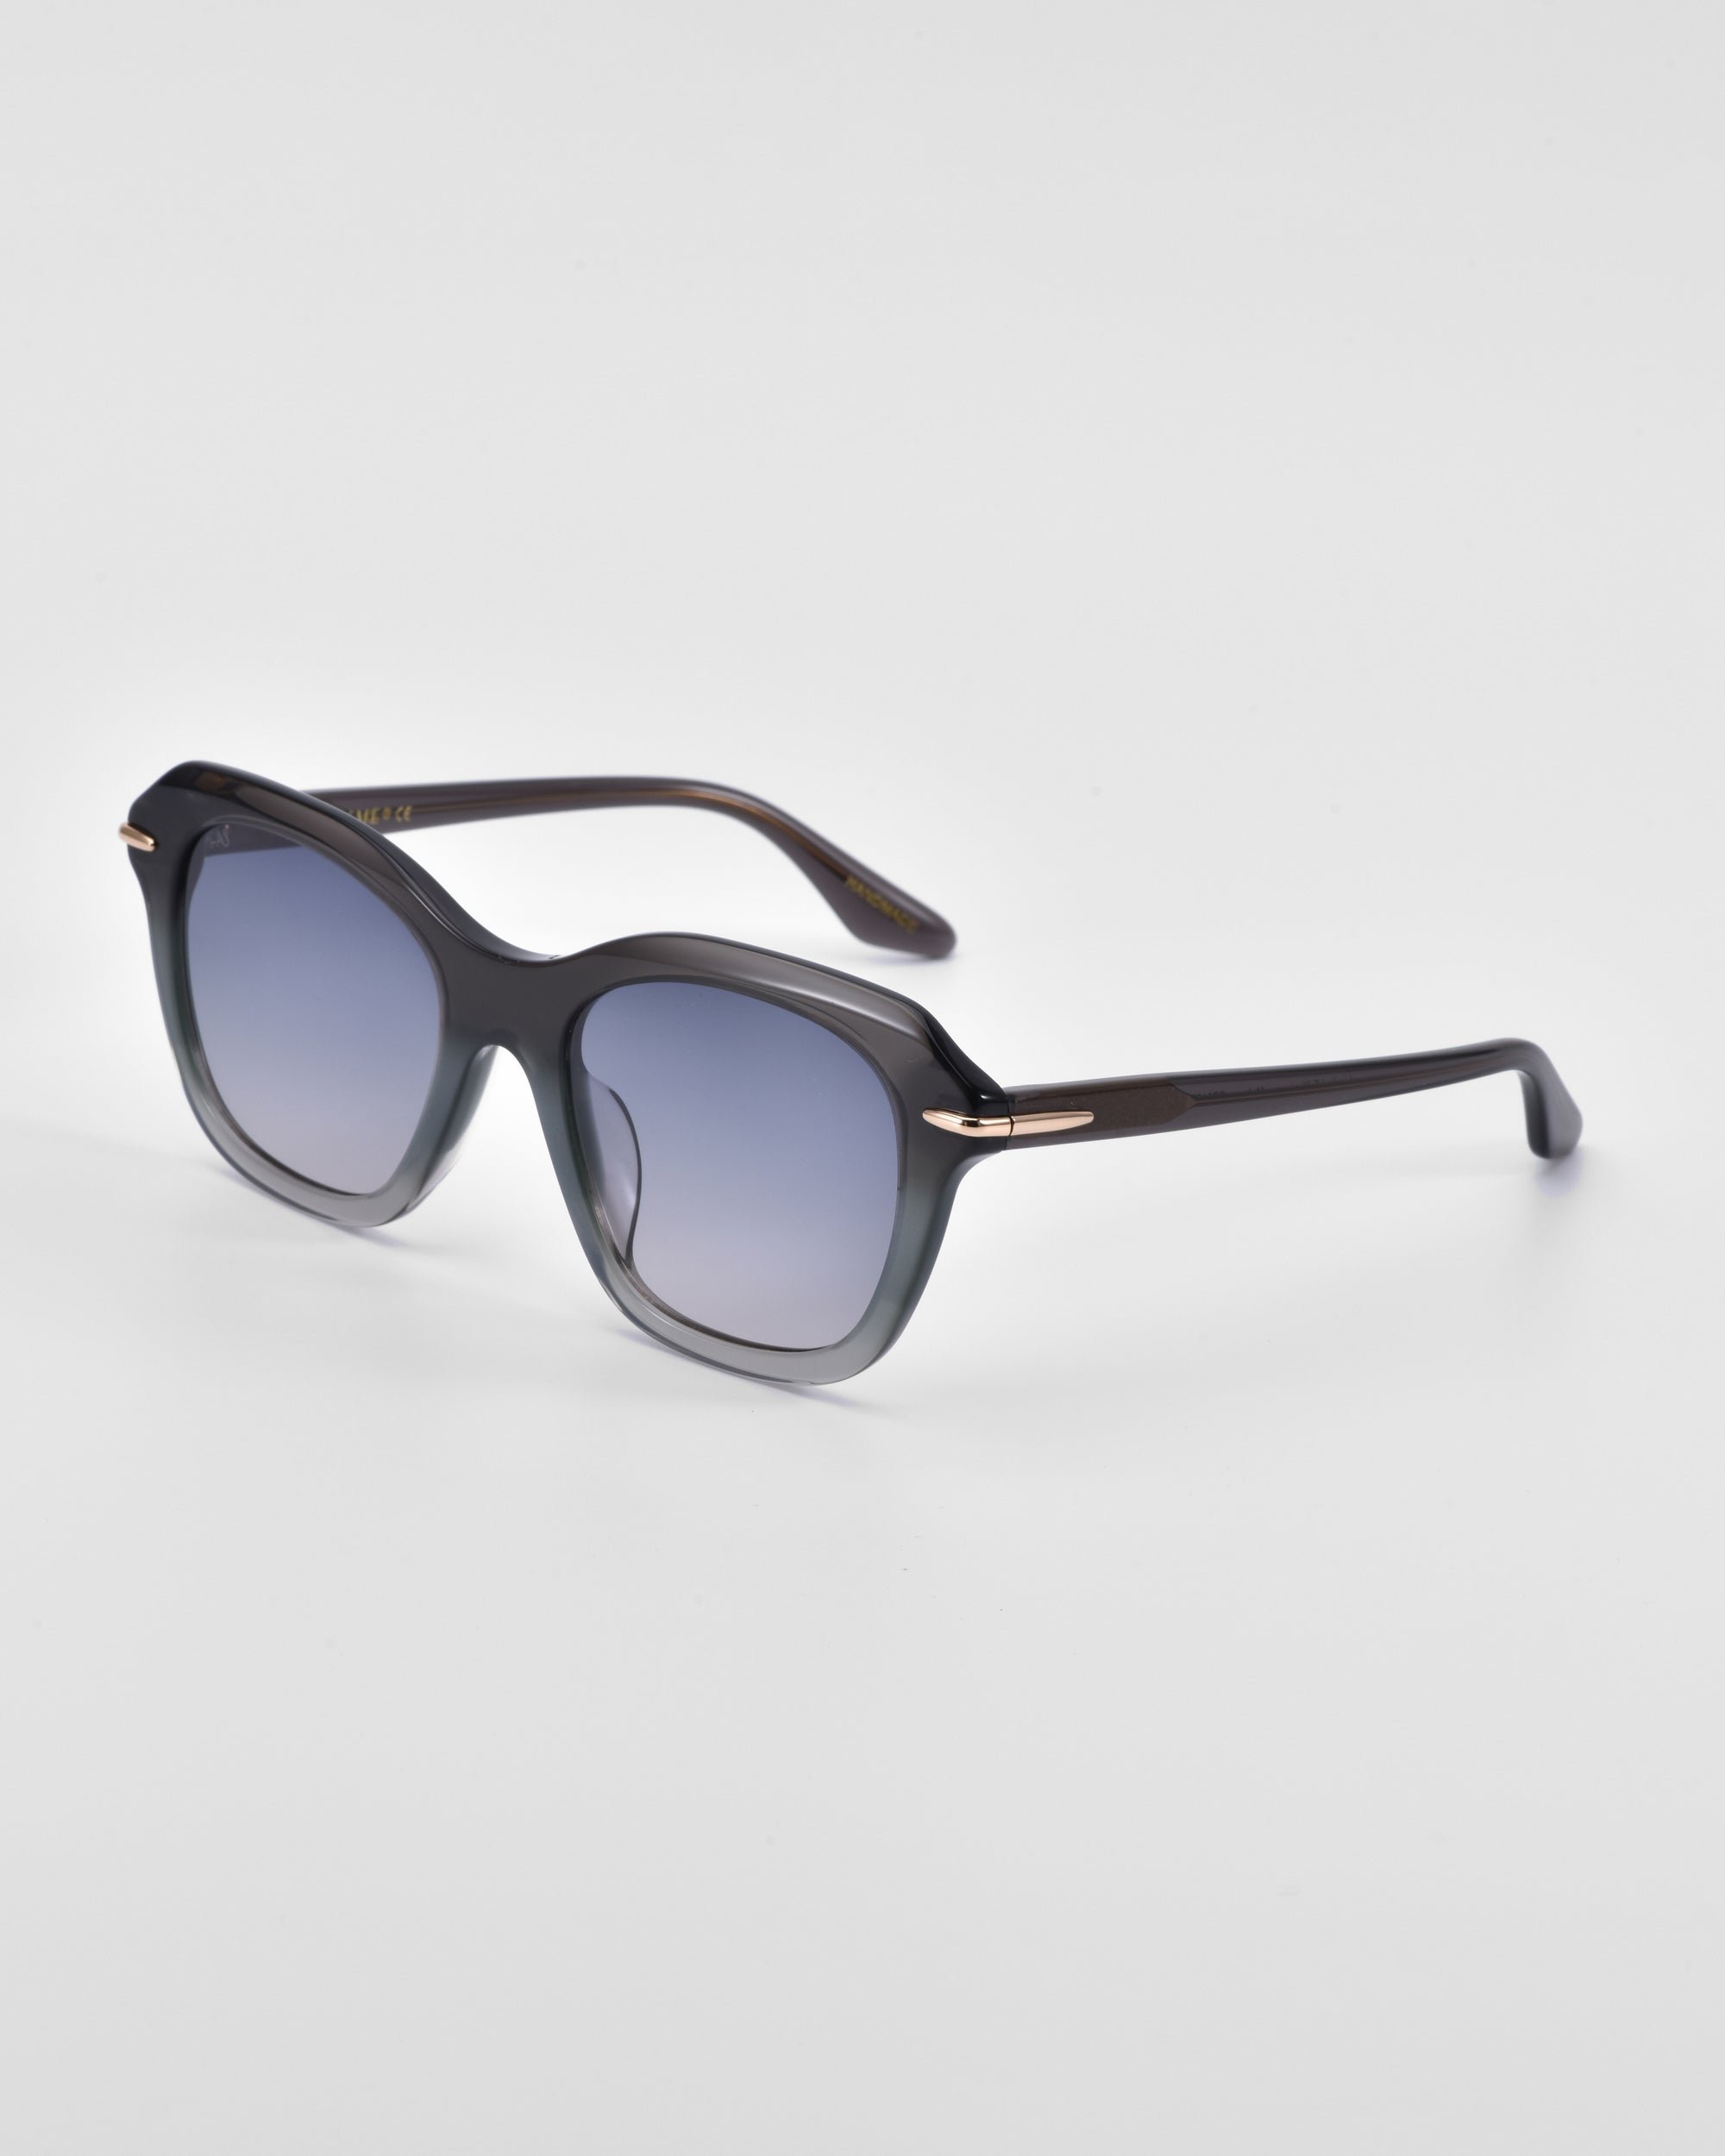 A pair of stylish Helene sunglasses by For Art's Sake® featuring large, square-shaped dark lenses and sleek, dark frames with a subtle metallic accent on the temples. The Helene sunglasses by For Art's Sake® are angled slightly to showcase both the front and side profiles against a plain white background, making them a true statement piece.